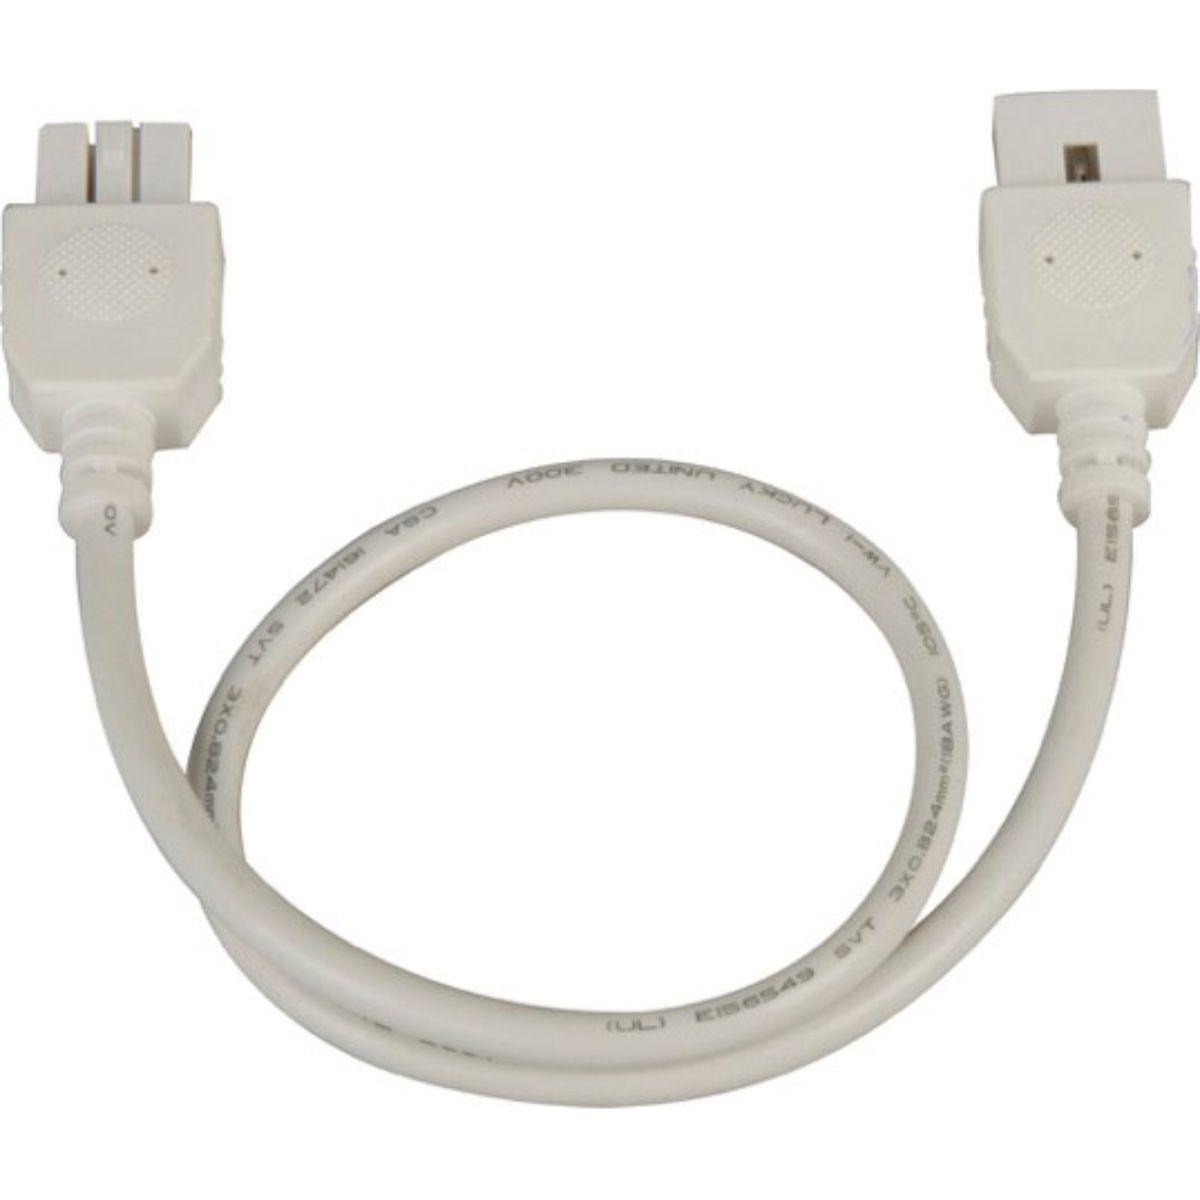 CounterMax 18in. Connecting Cord, White